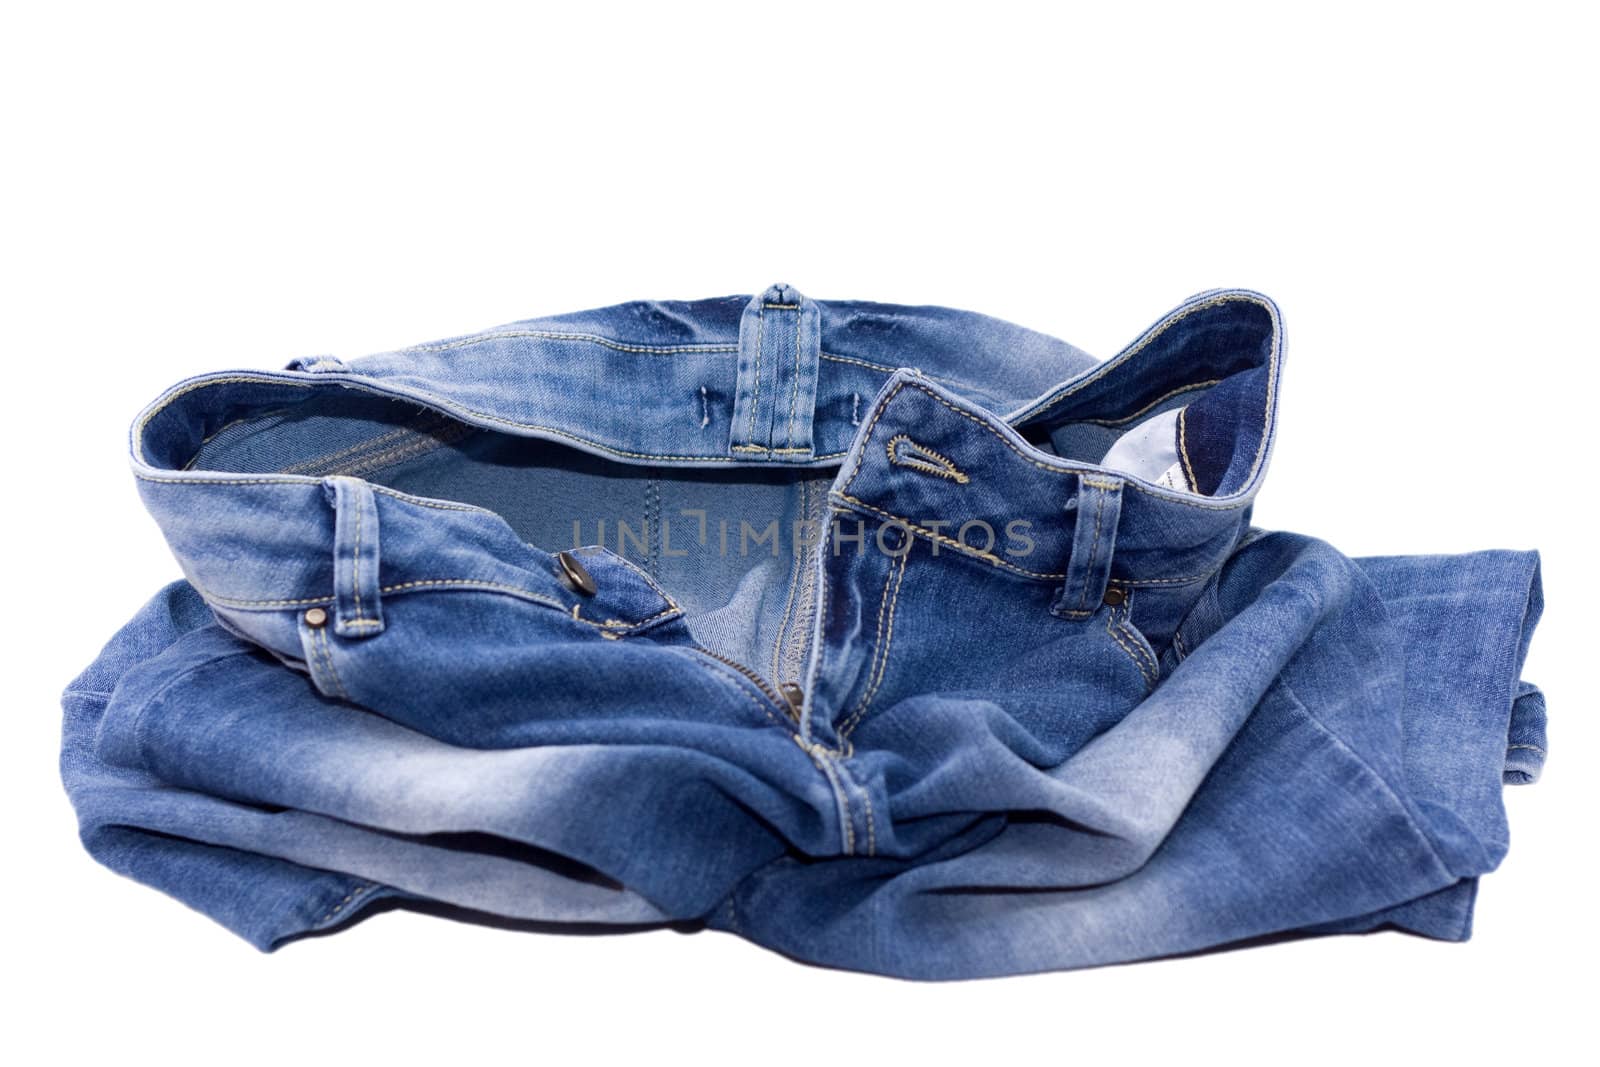 Remove your jeans - blue jeans in a heap on the floor.

